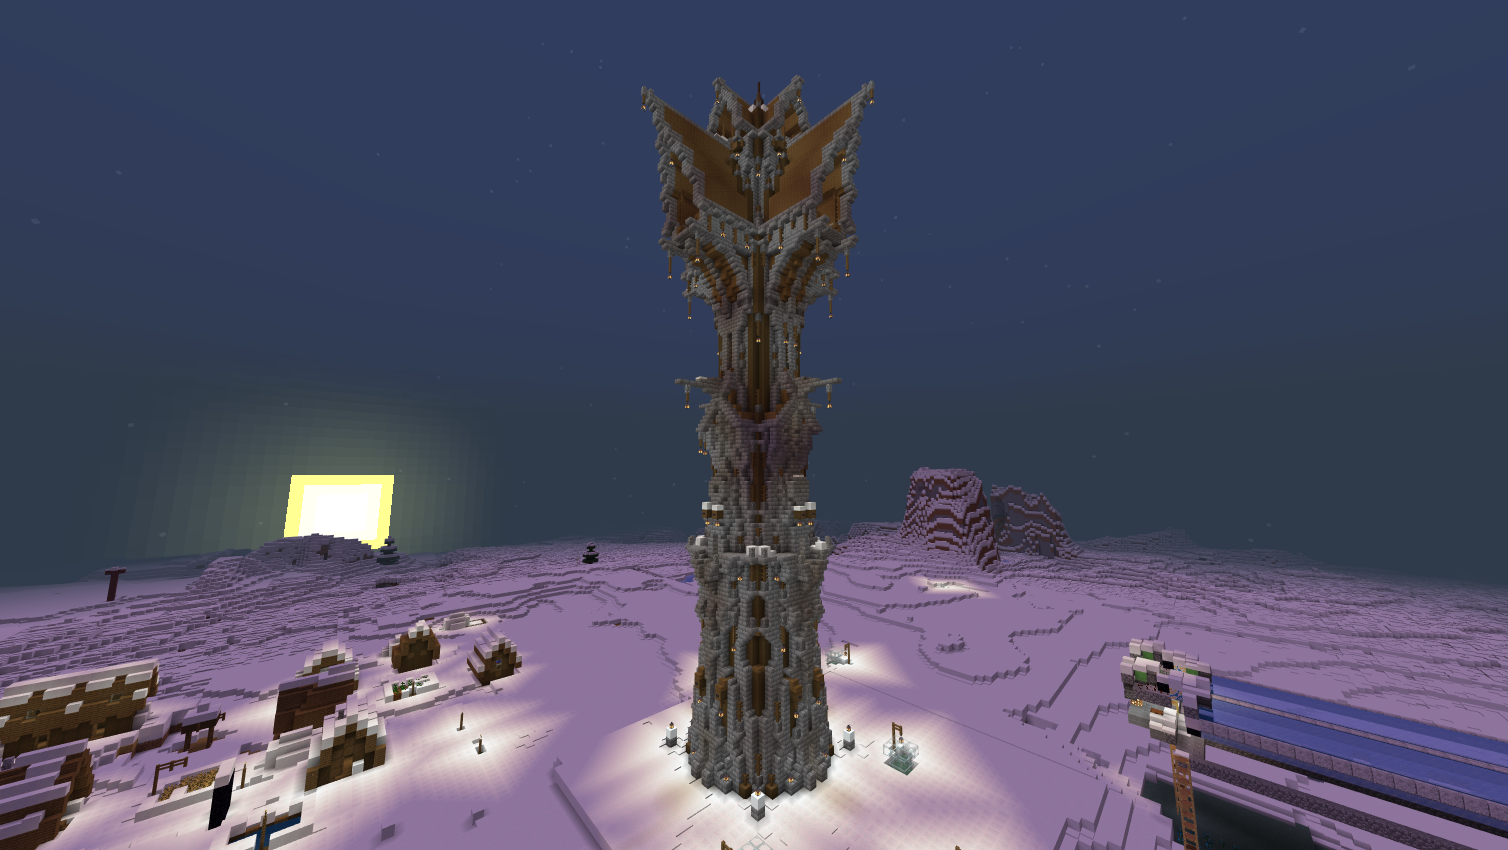 Gorgeous tower in the middle of a snowy tundra